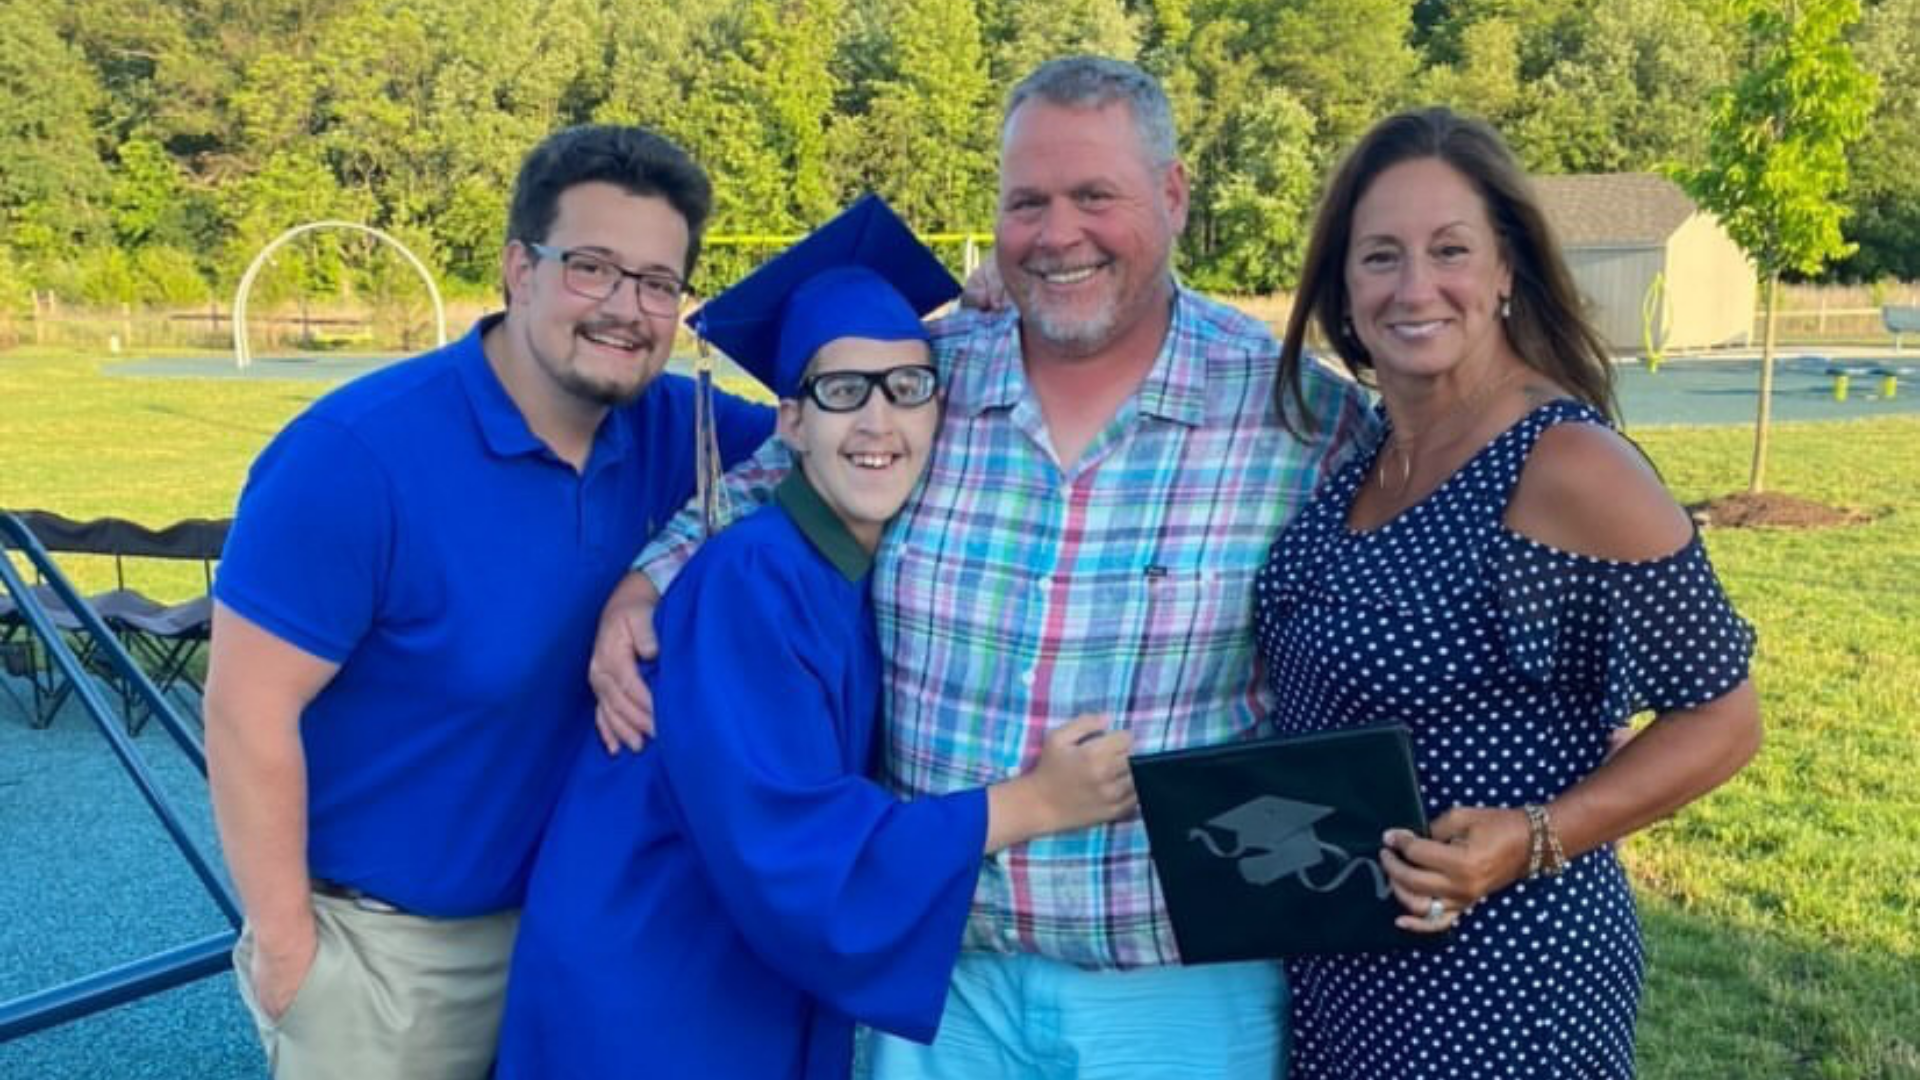 A graduate in a blue cap and gown and his three family members stand on an outdoor patio and smile